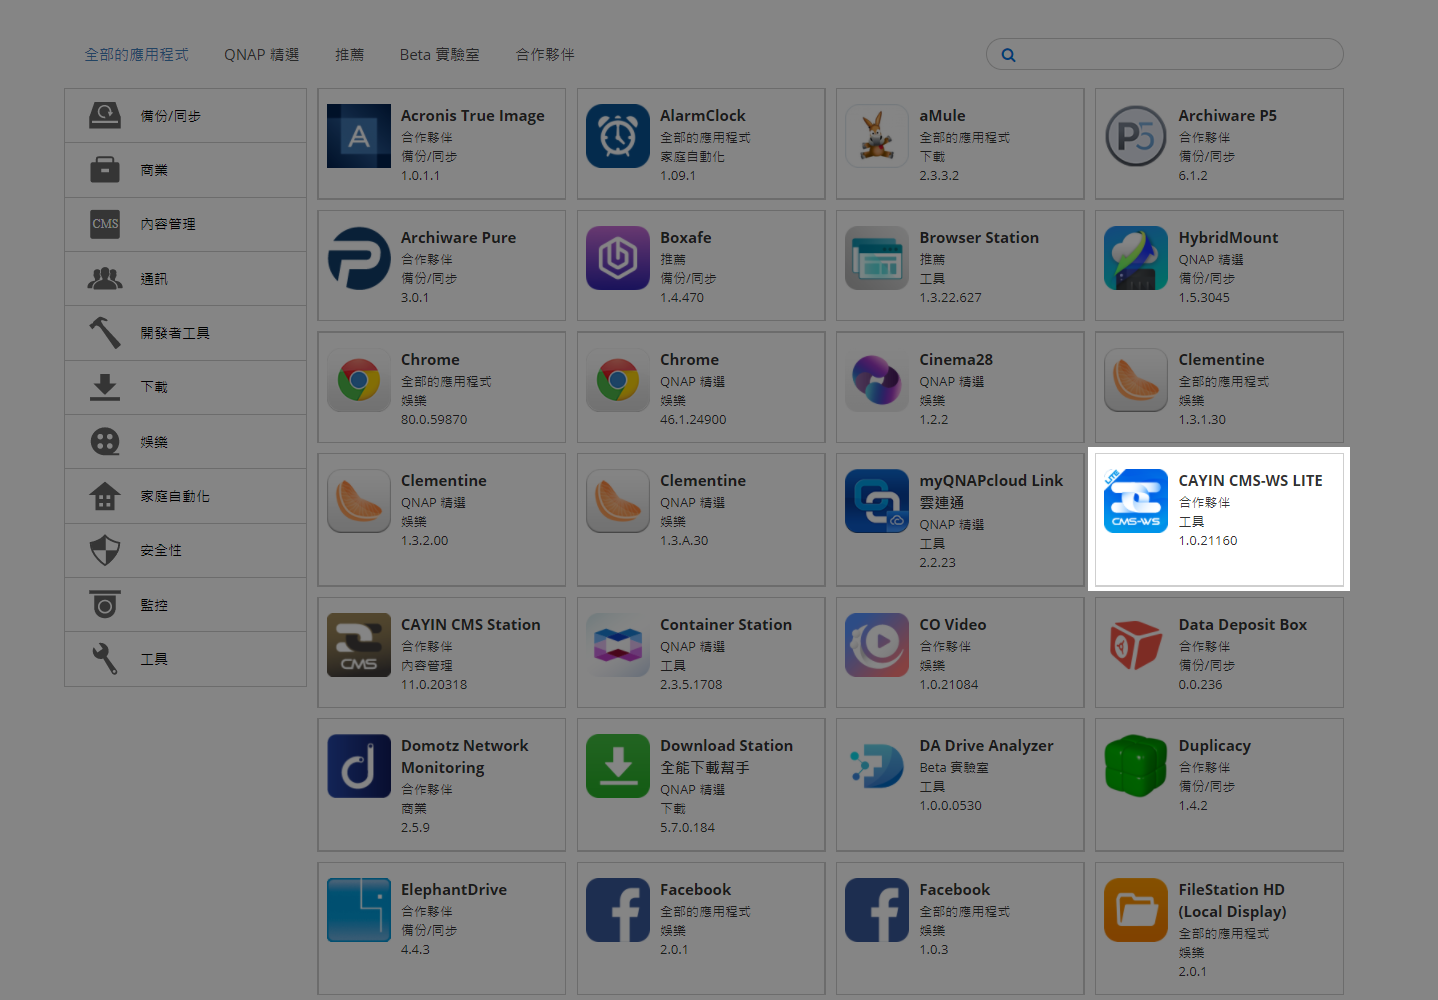 Go to QNAP App Center to search and install CAYIN CMS WS Lite